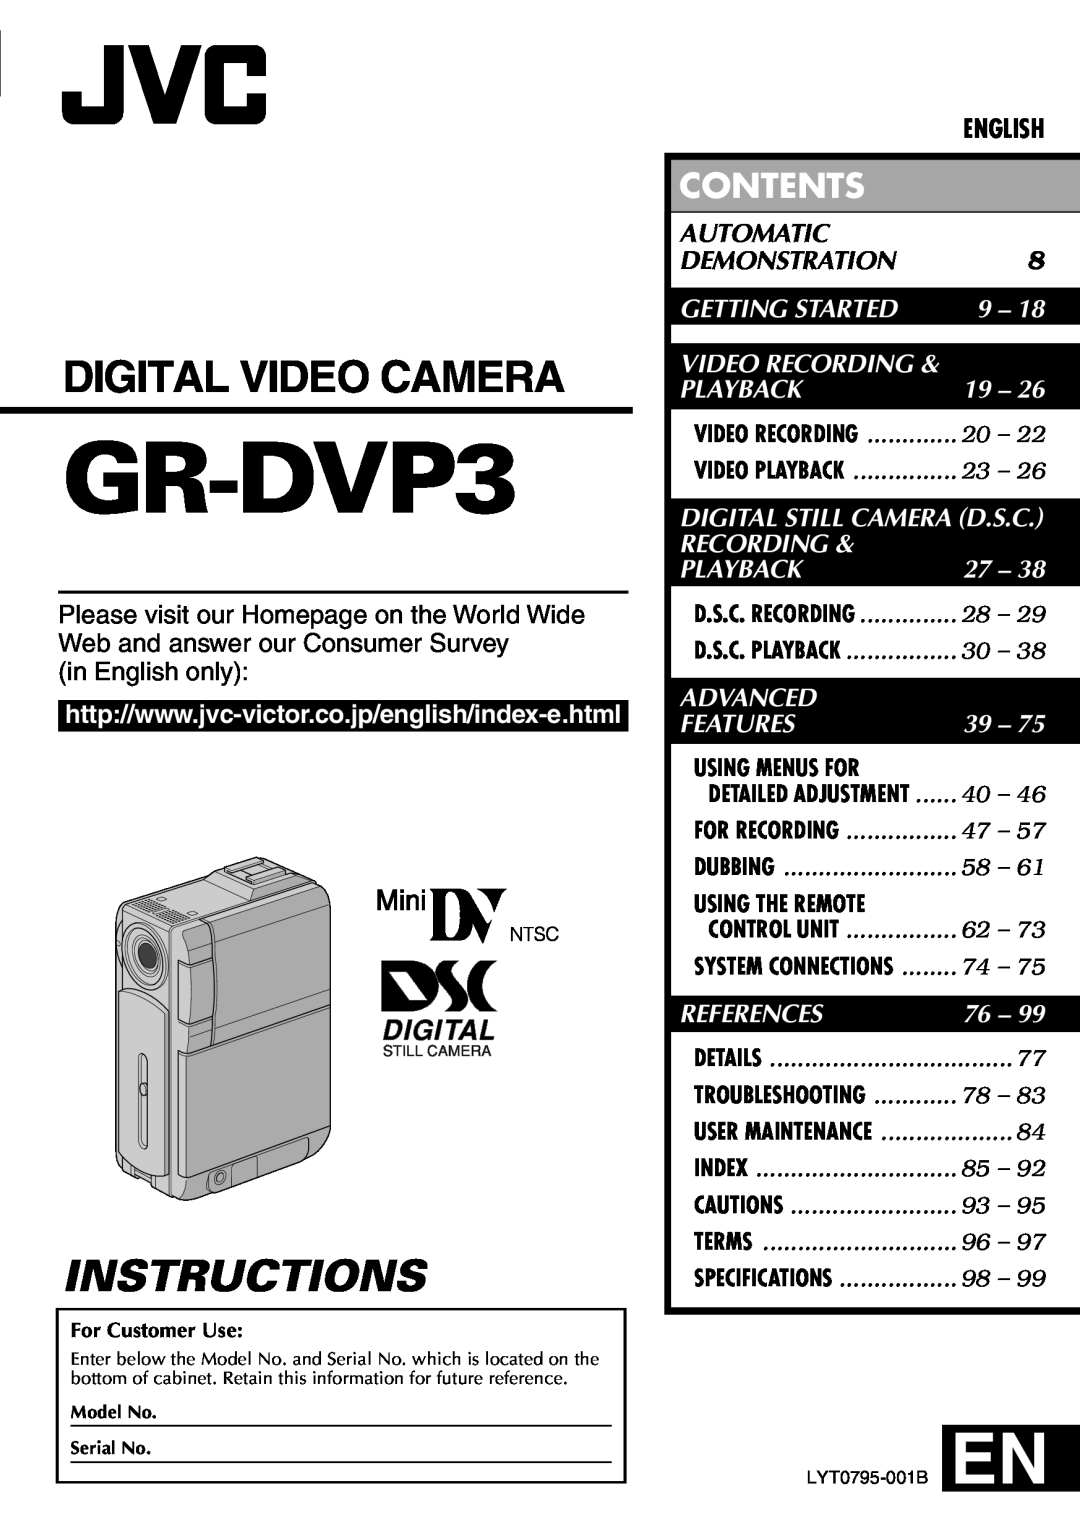 JVC GR-DVP3 specifications Contents, in English only, Automatic, Demonstration, Getting Started, Video Recording, Playback 